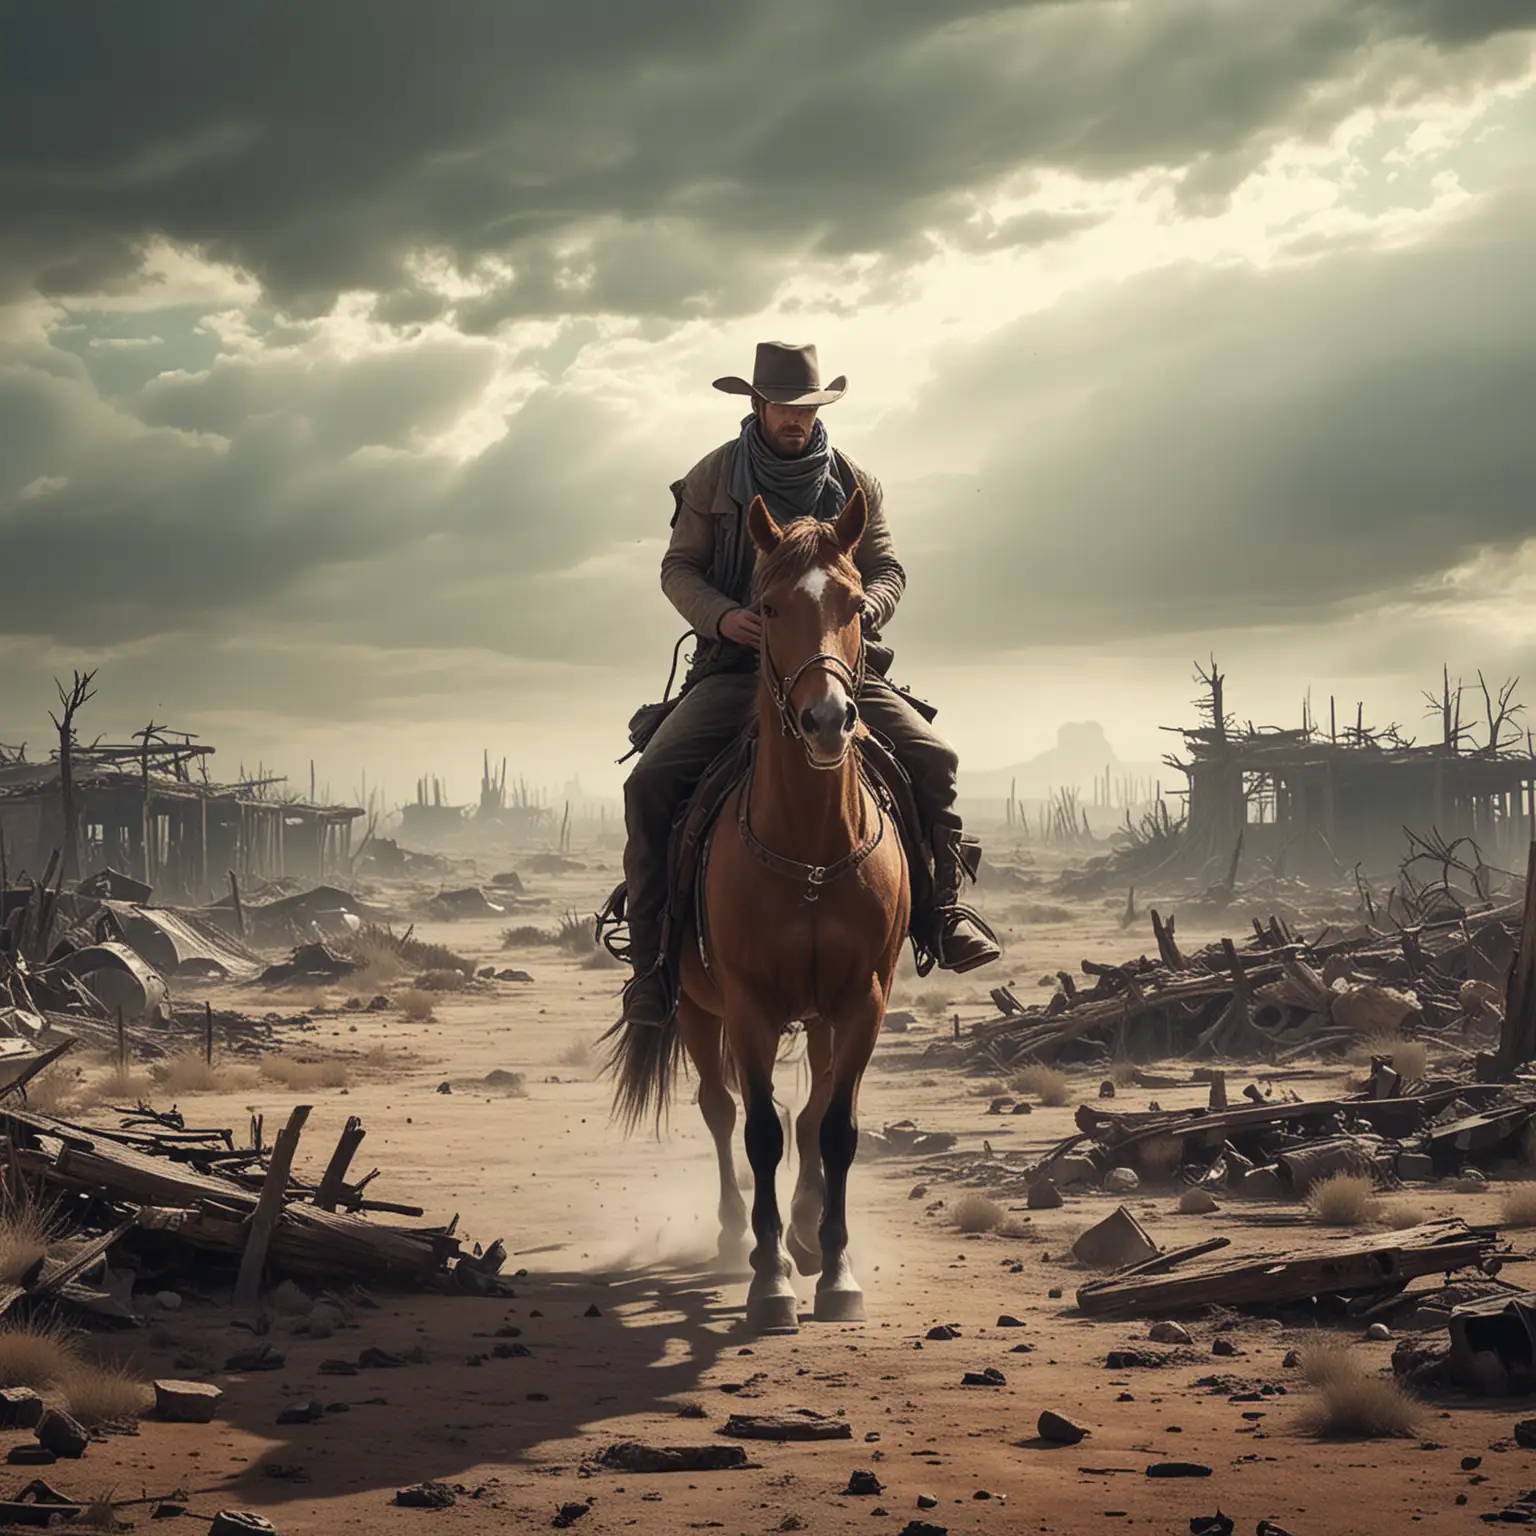 Cowboy Riding Horse in PostApocalyptic Wasteland